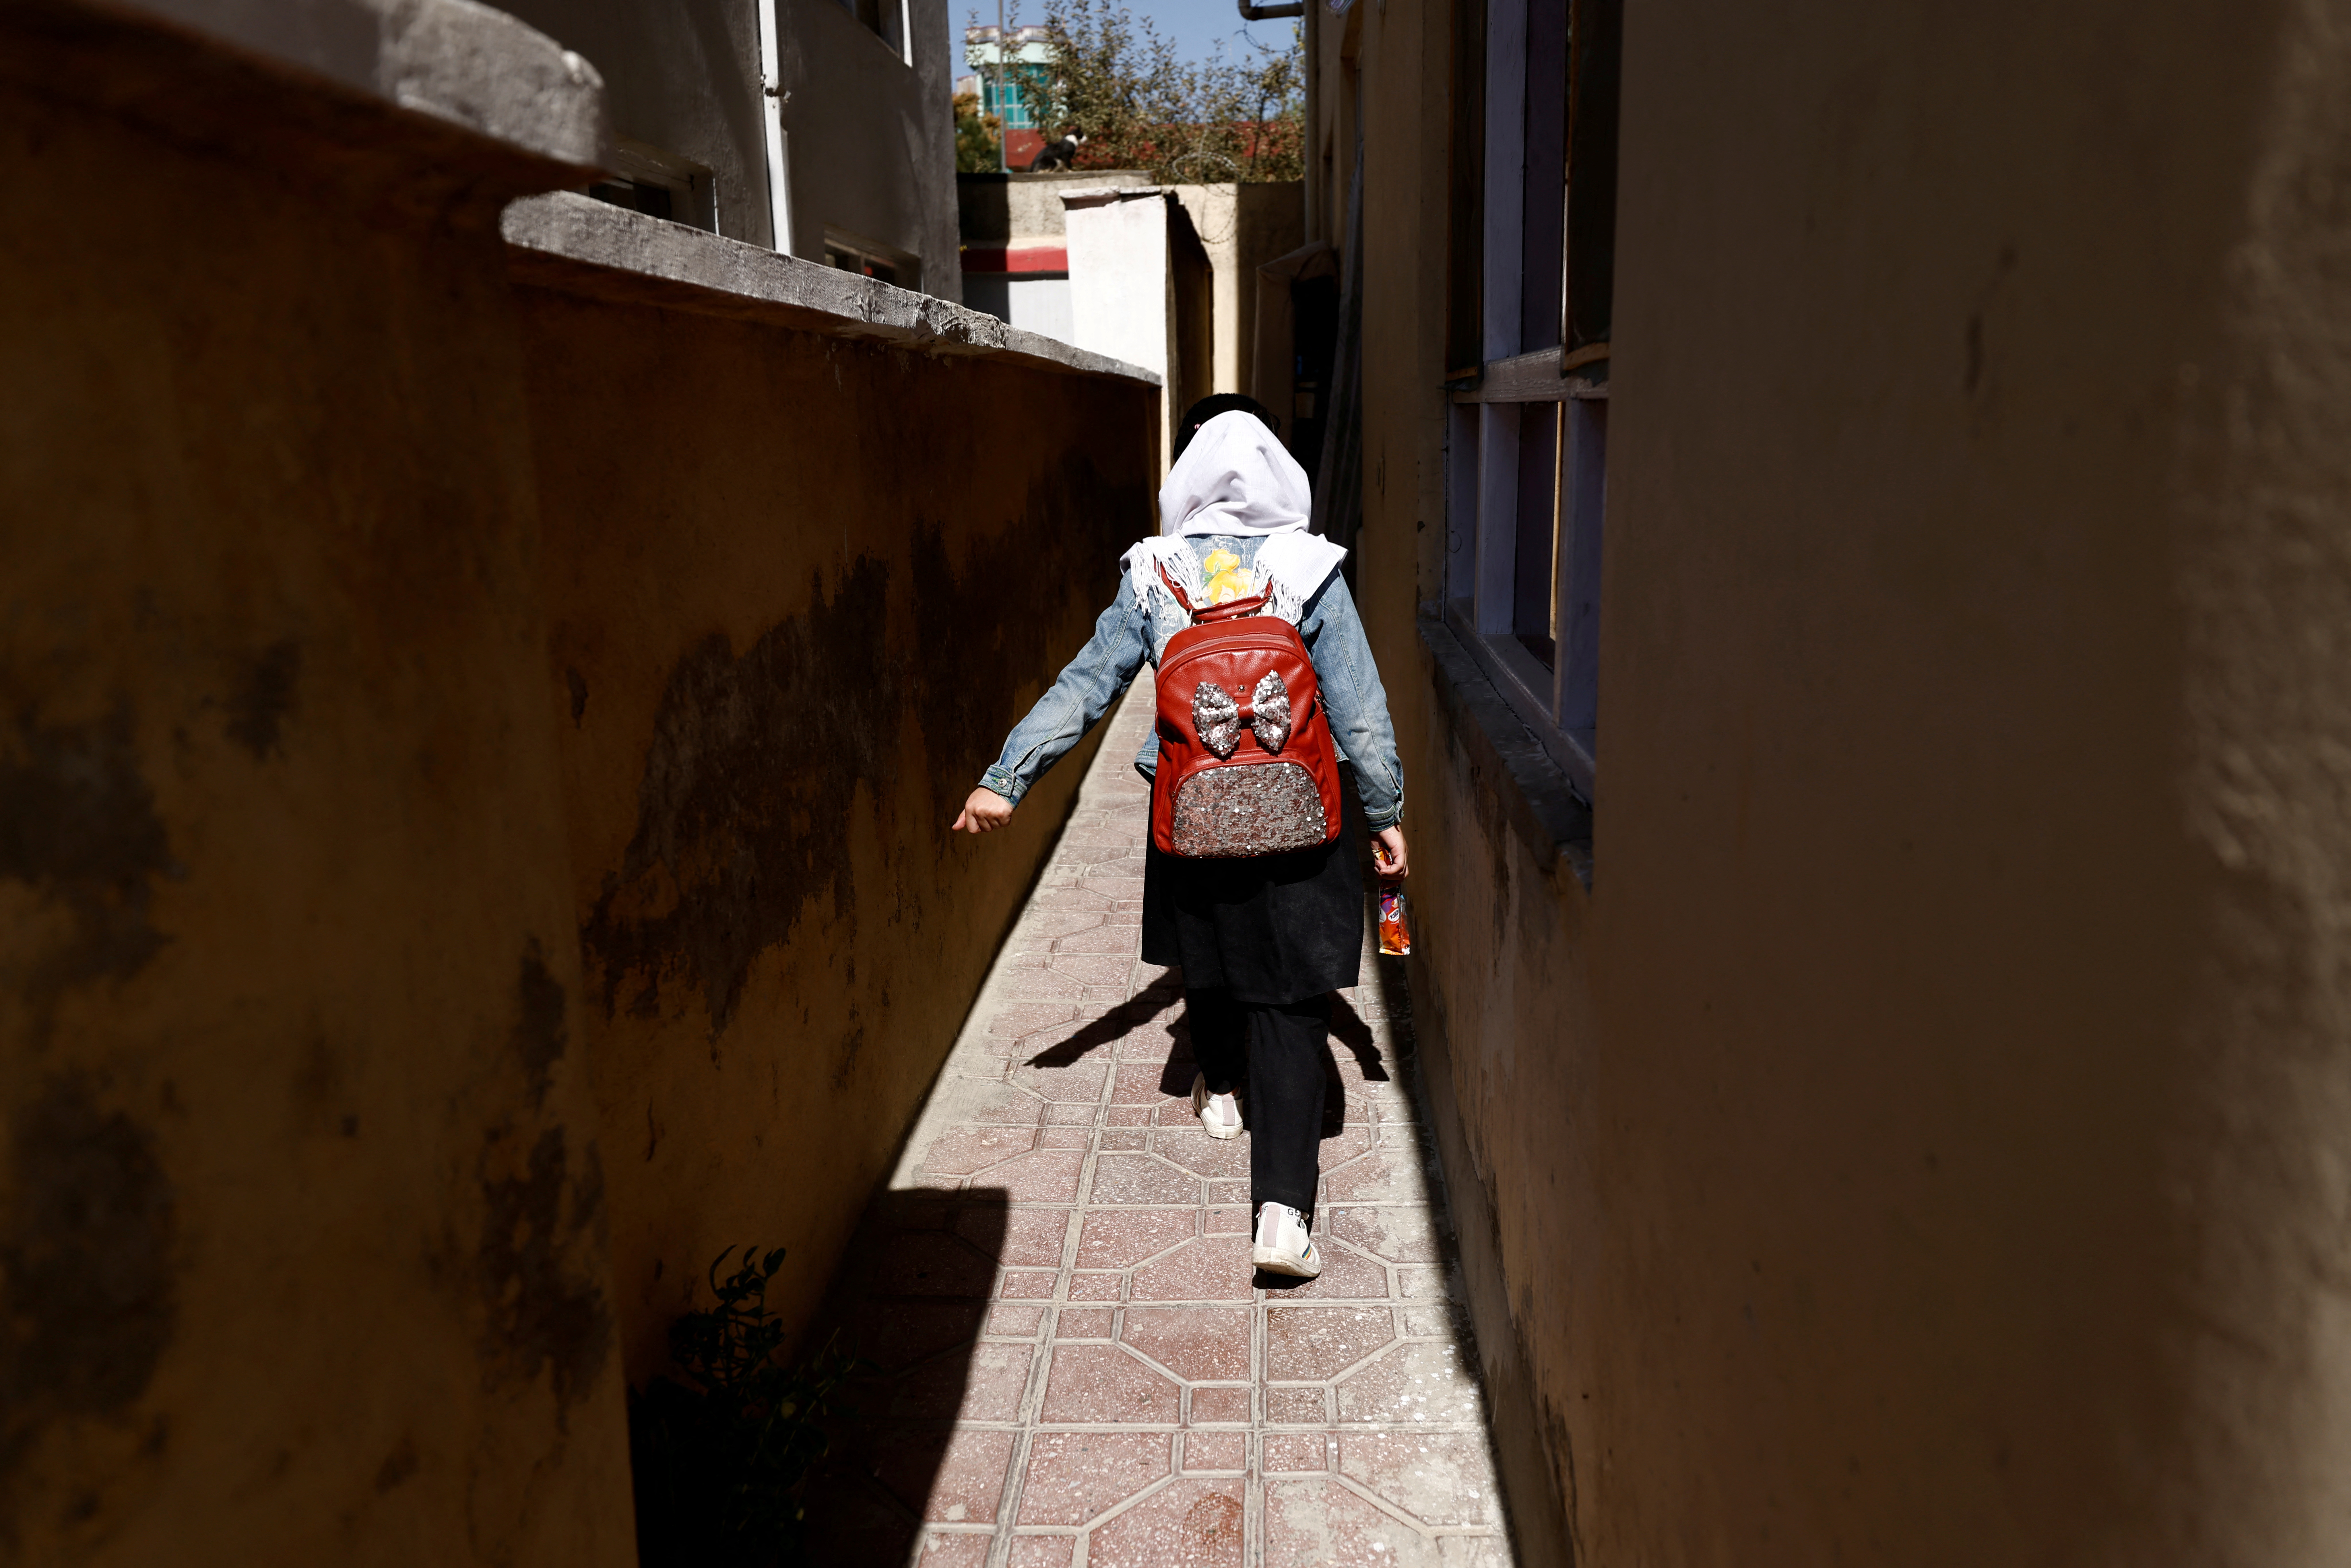 A school student walks back from school through an alleyway near her home in Kabul